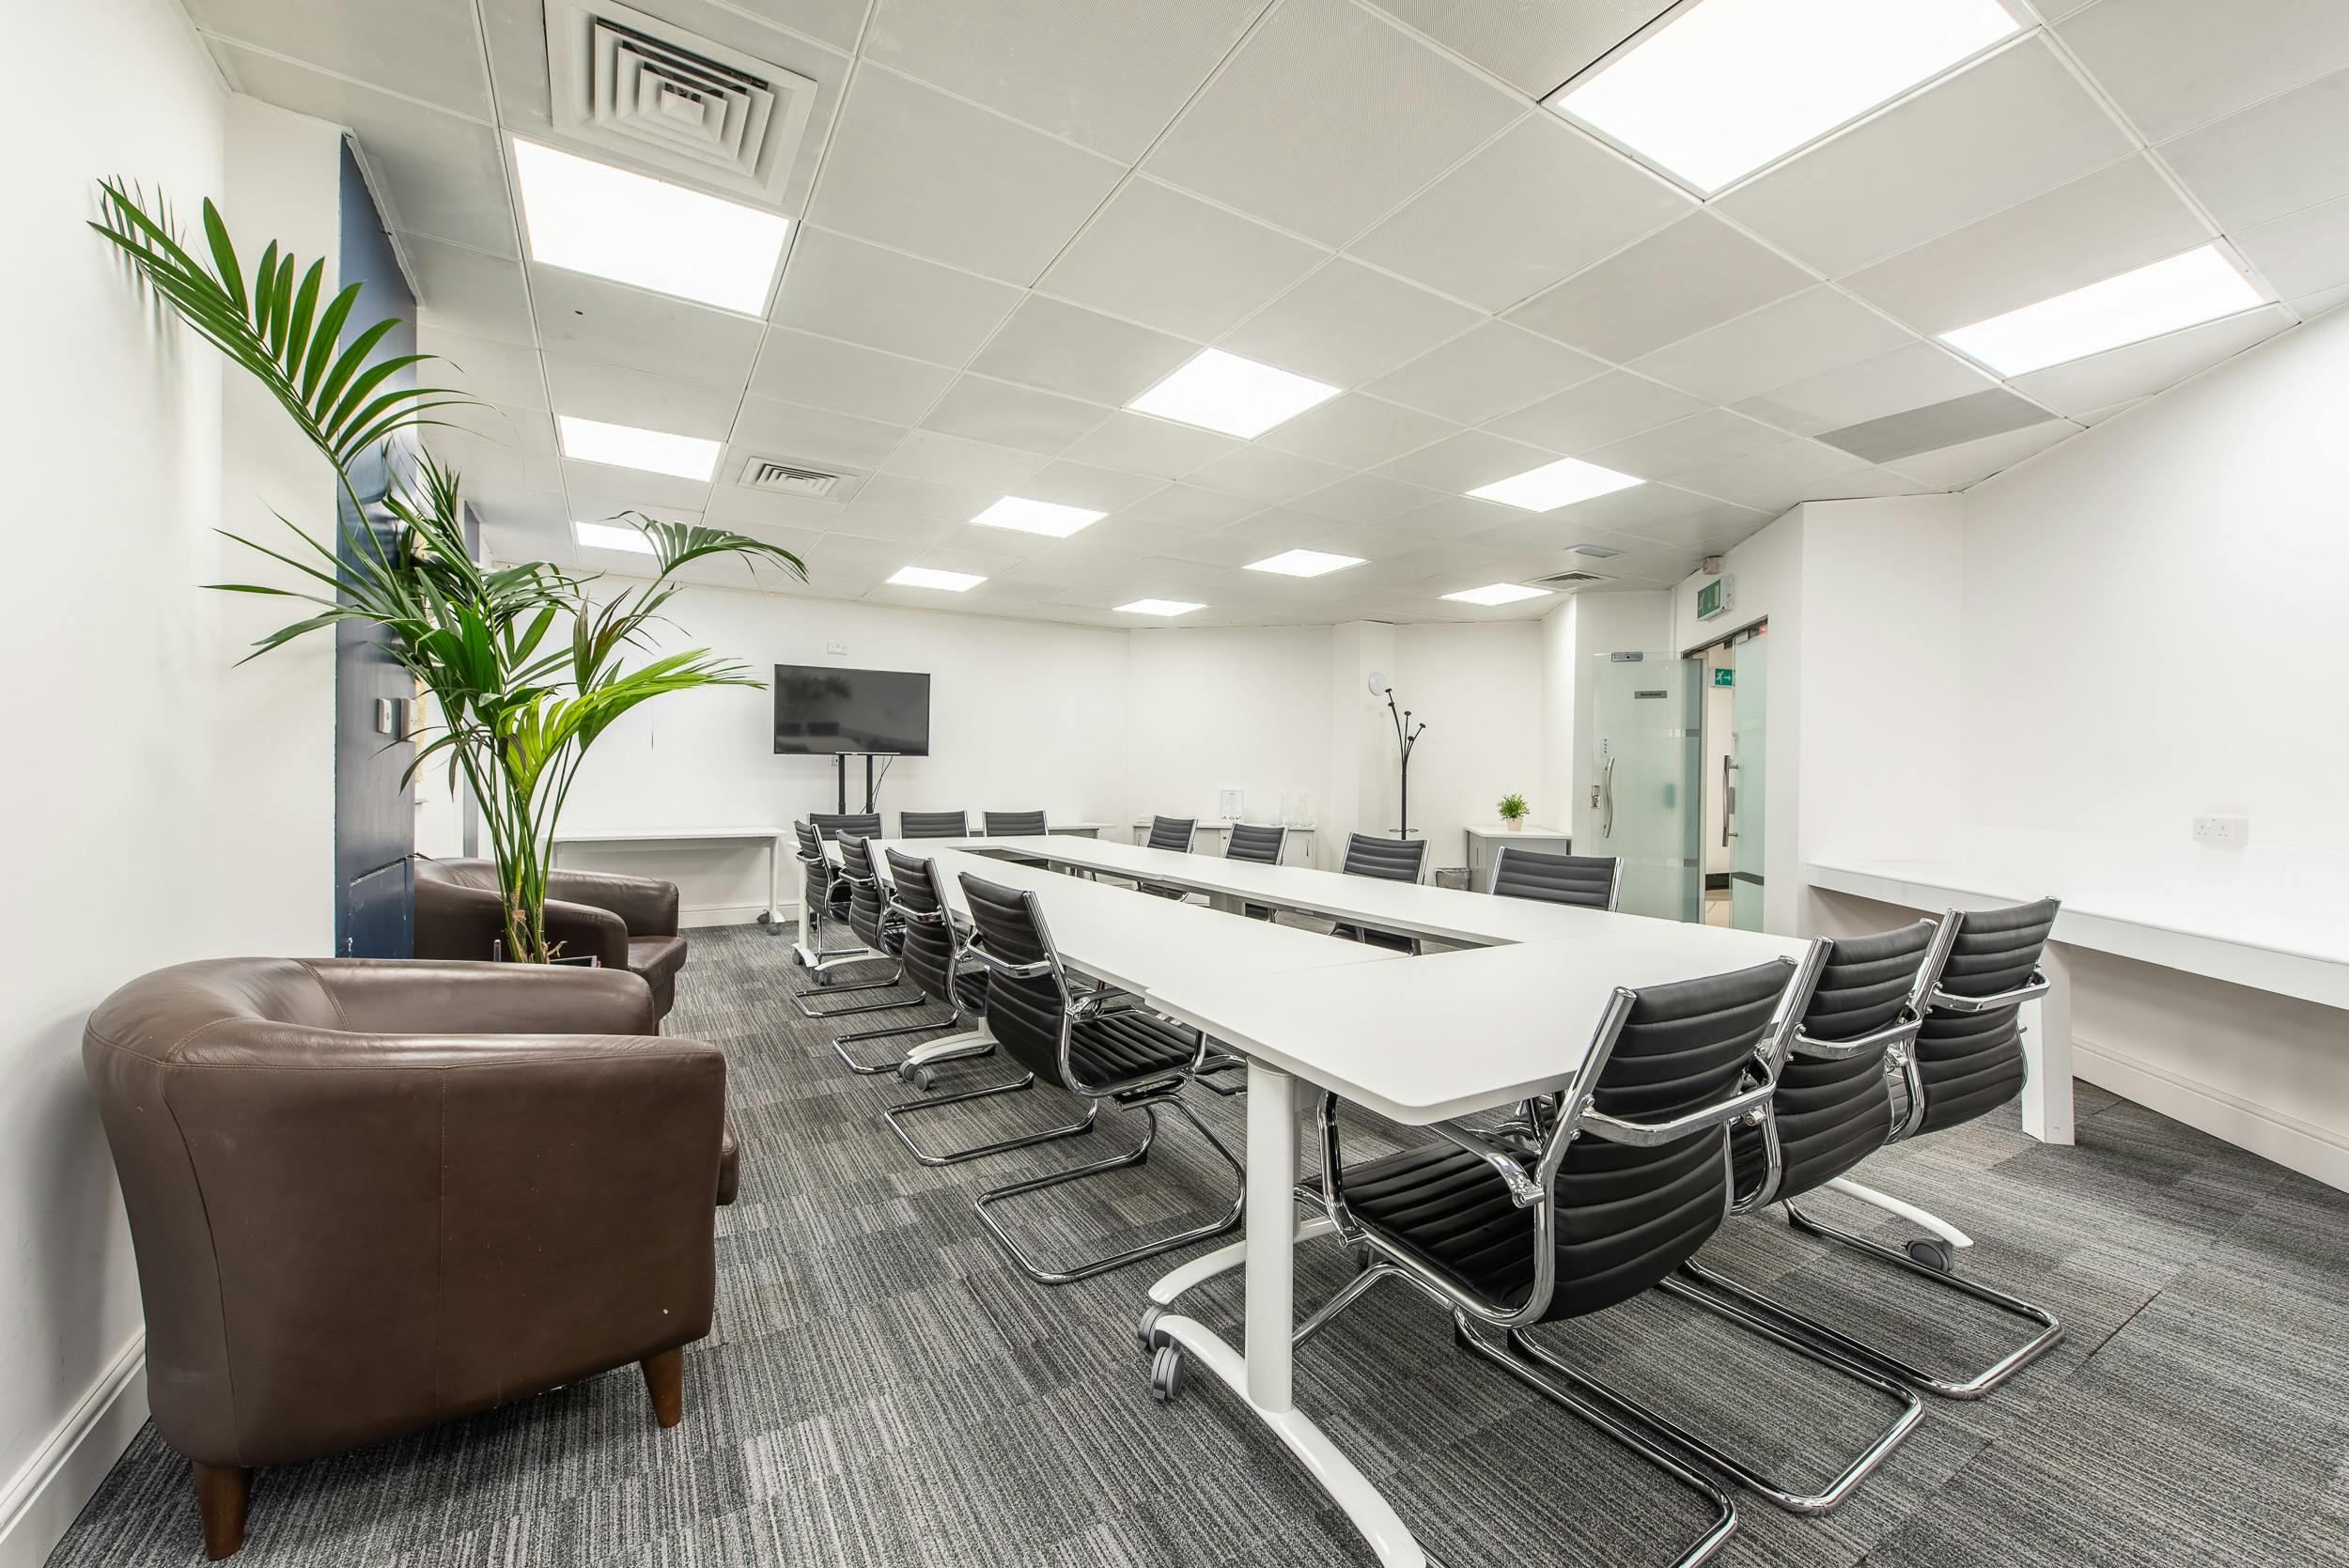 Cannon Street – 12-14 Person Office With Meeting Room – Dowgate Hill